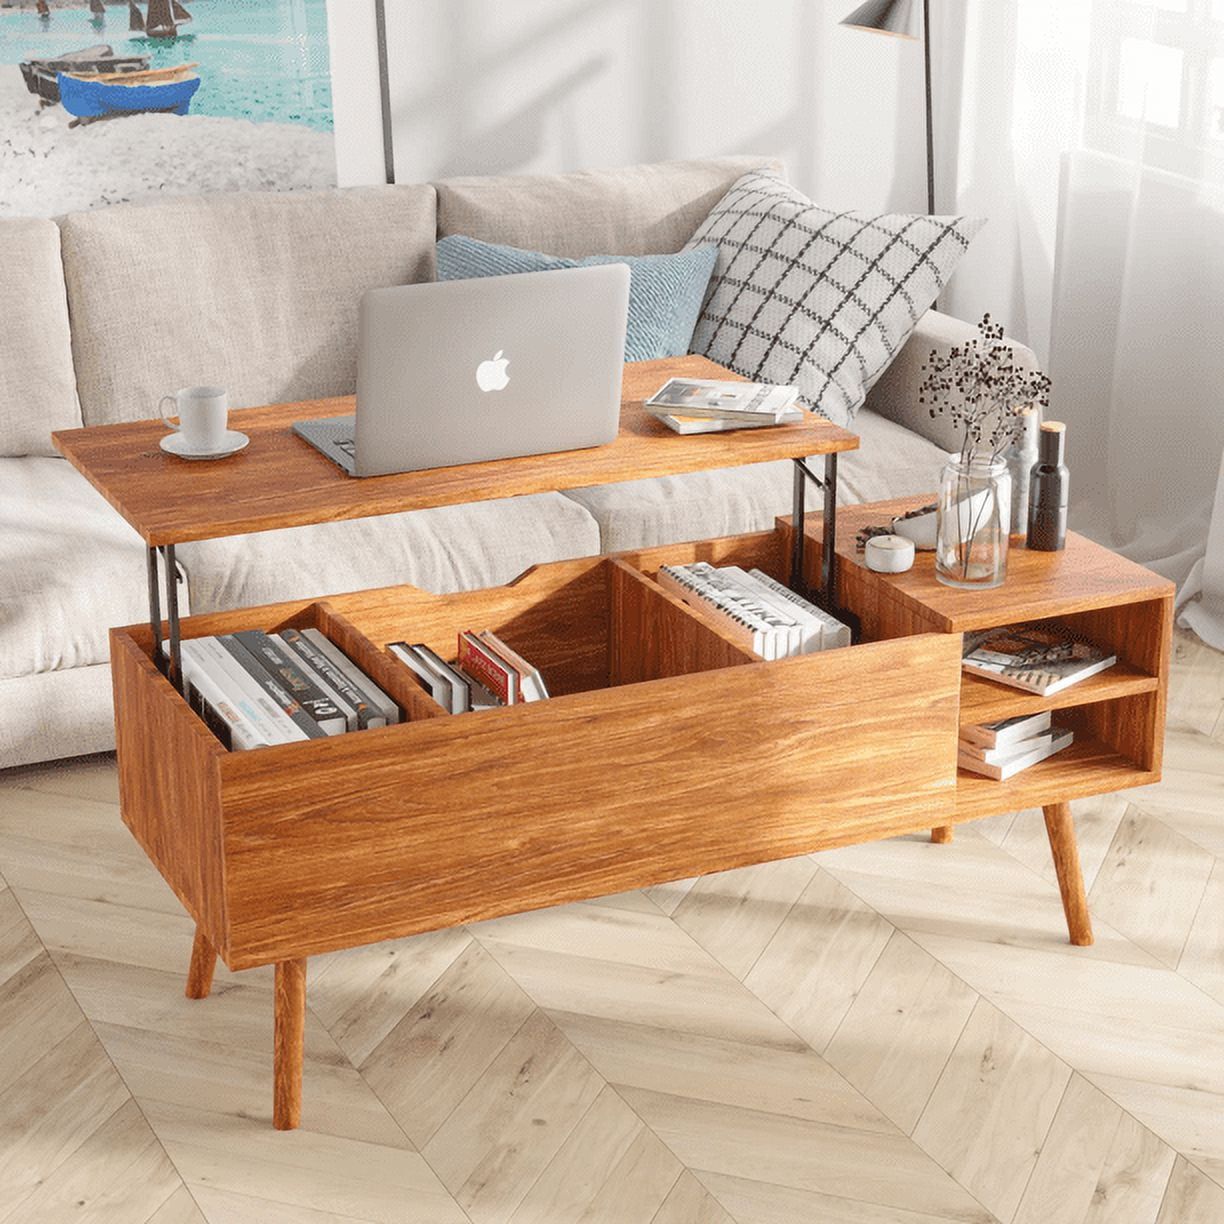 Modern Lift Top Coffee Table With Hidden Compartment Storage,Adjustable Wood  Table For Living Room,Brown – Walmart Pertaining To Wood Lift Top Coffee Tables (Photo 1 of 15)